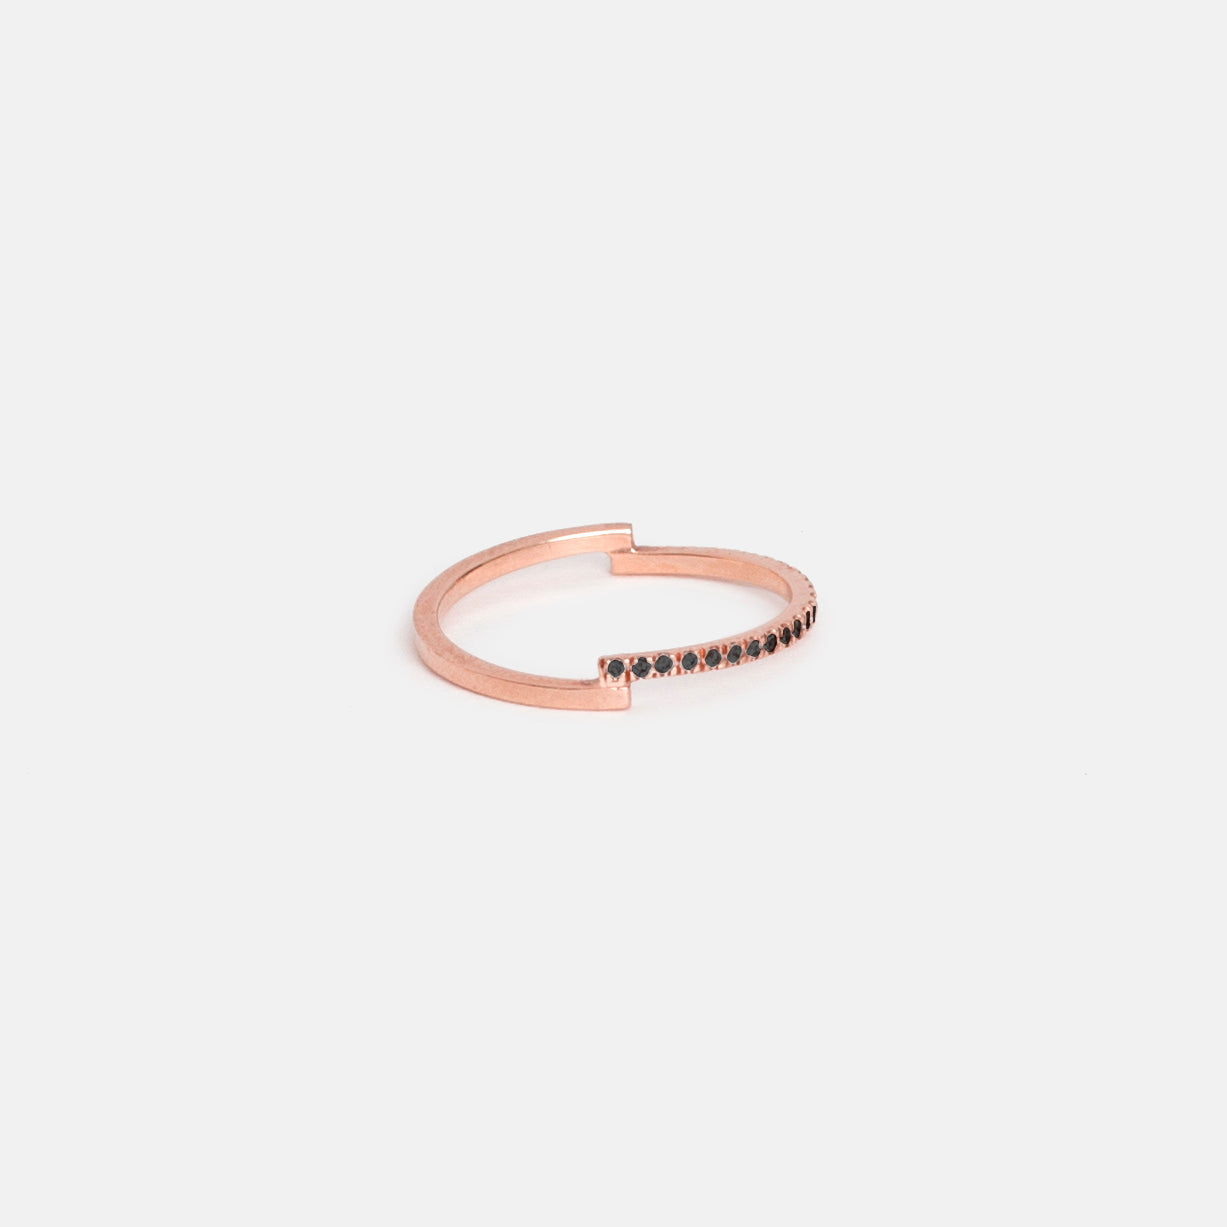 Para Unique Ring in 14k Rose Gold set with Black Diamonds By SHW Fine Jewelry NYC